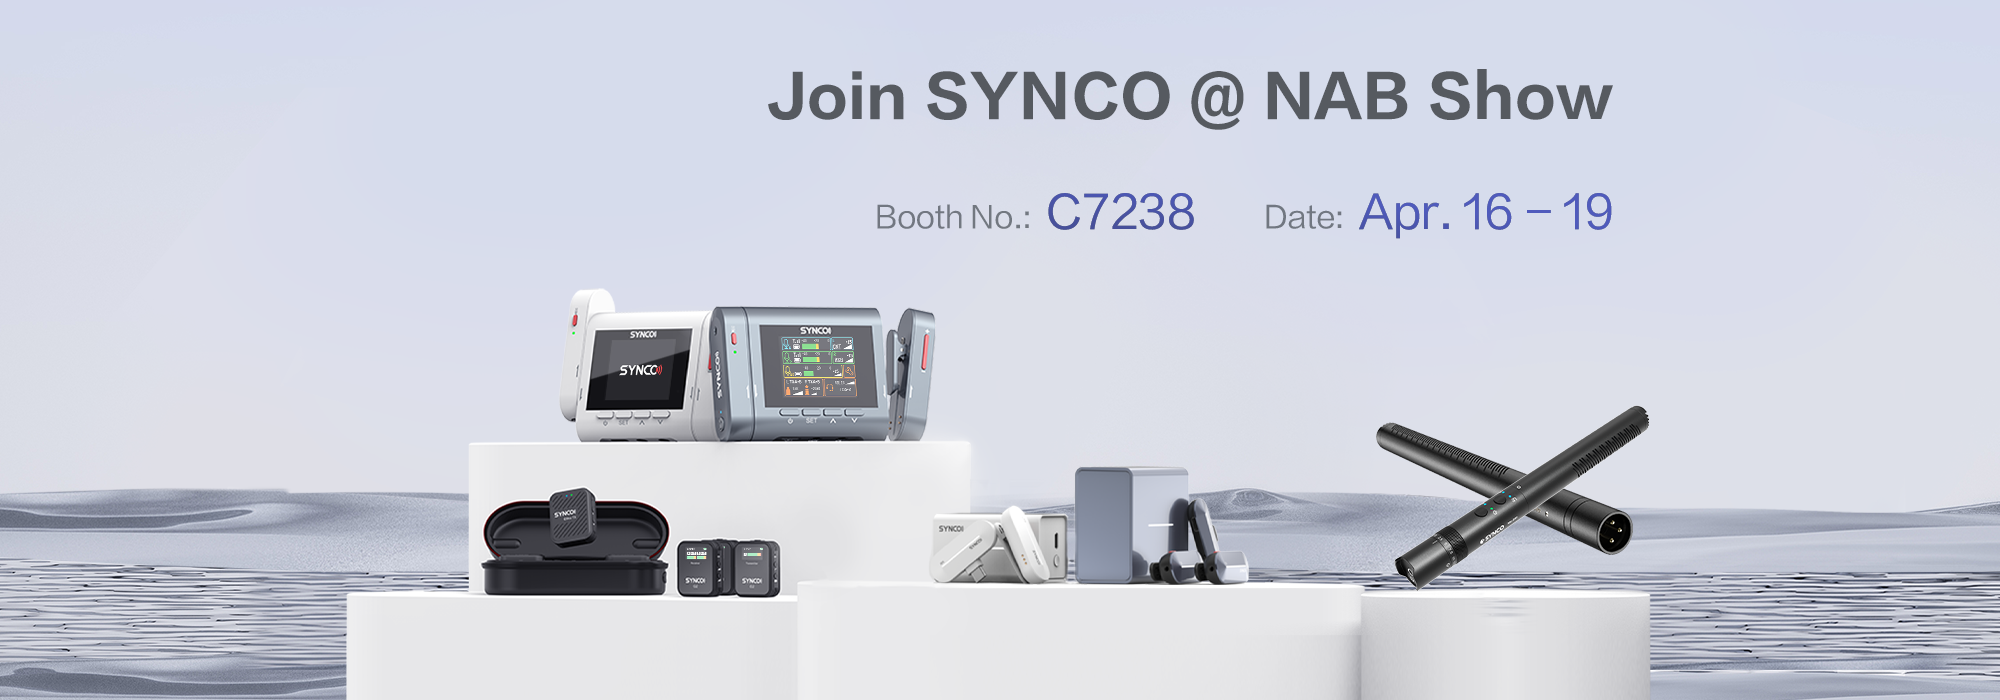 Join SYNCO at NAB show from Apr.16 to 19 at Booth C7238.